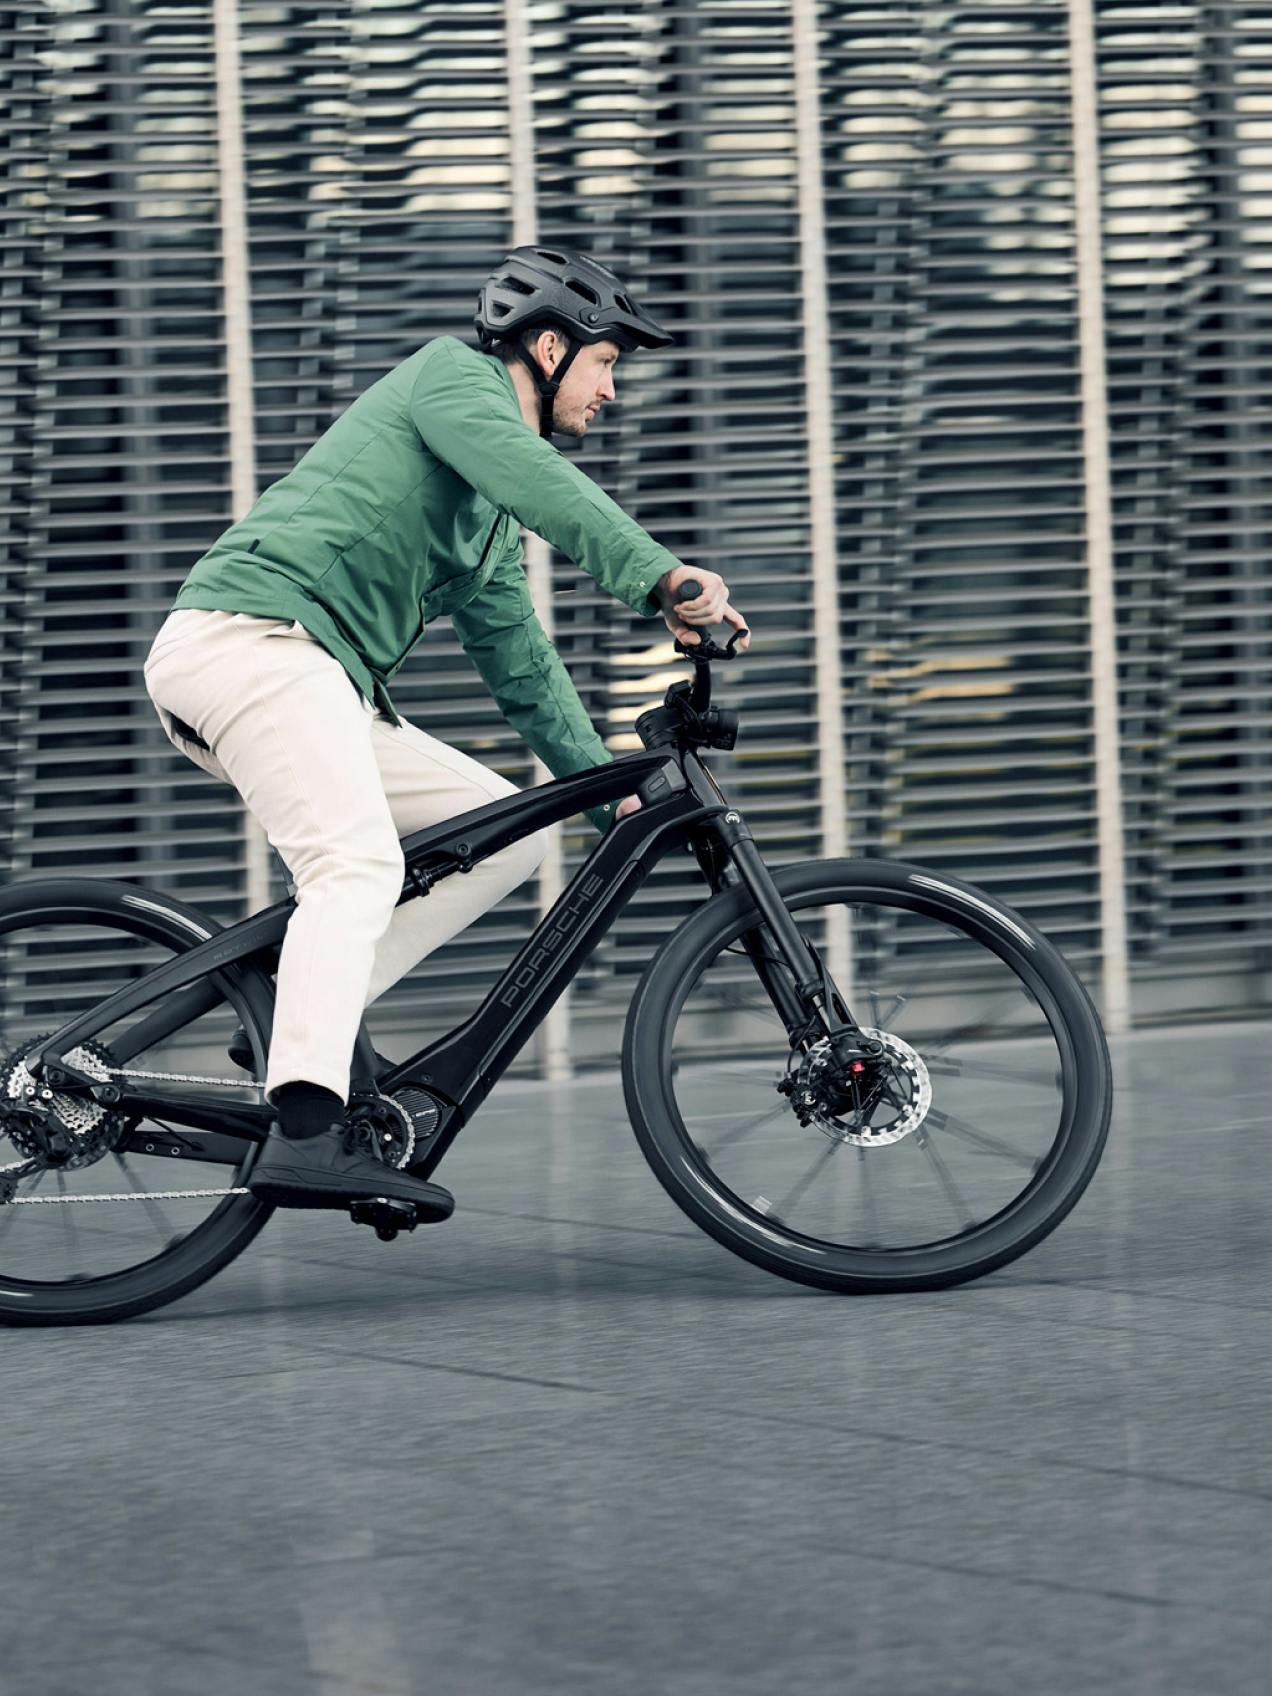 Pictured is a cyclist with a green jacket from the side riding a Porsche Ebike Sport.